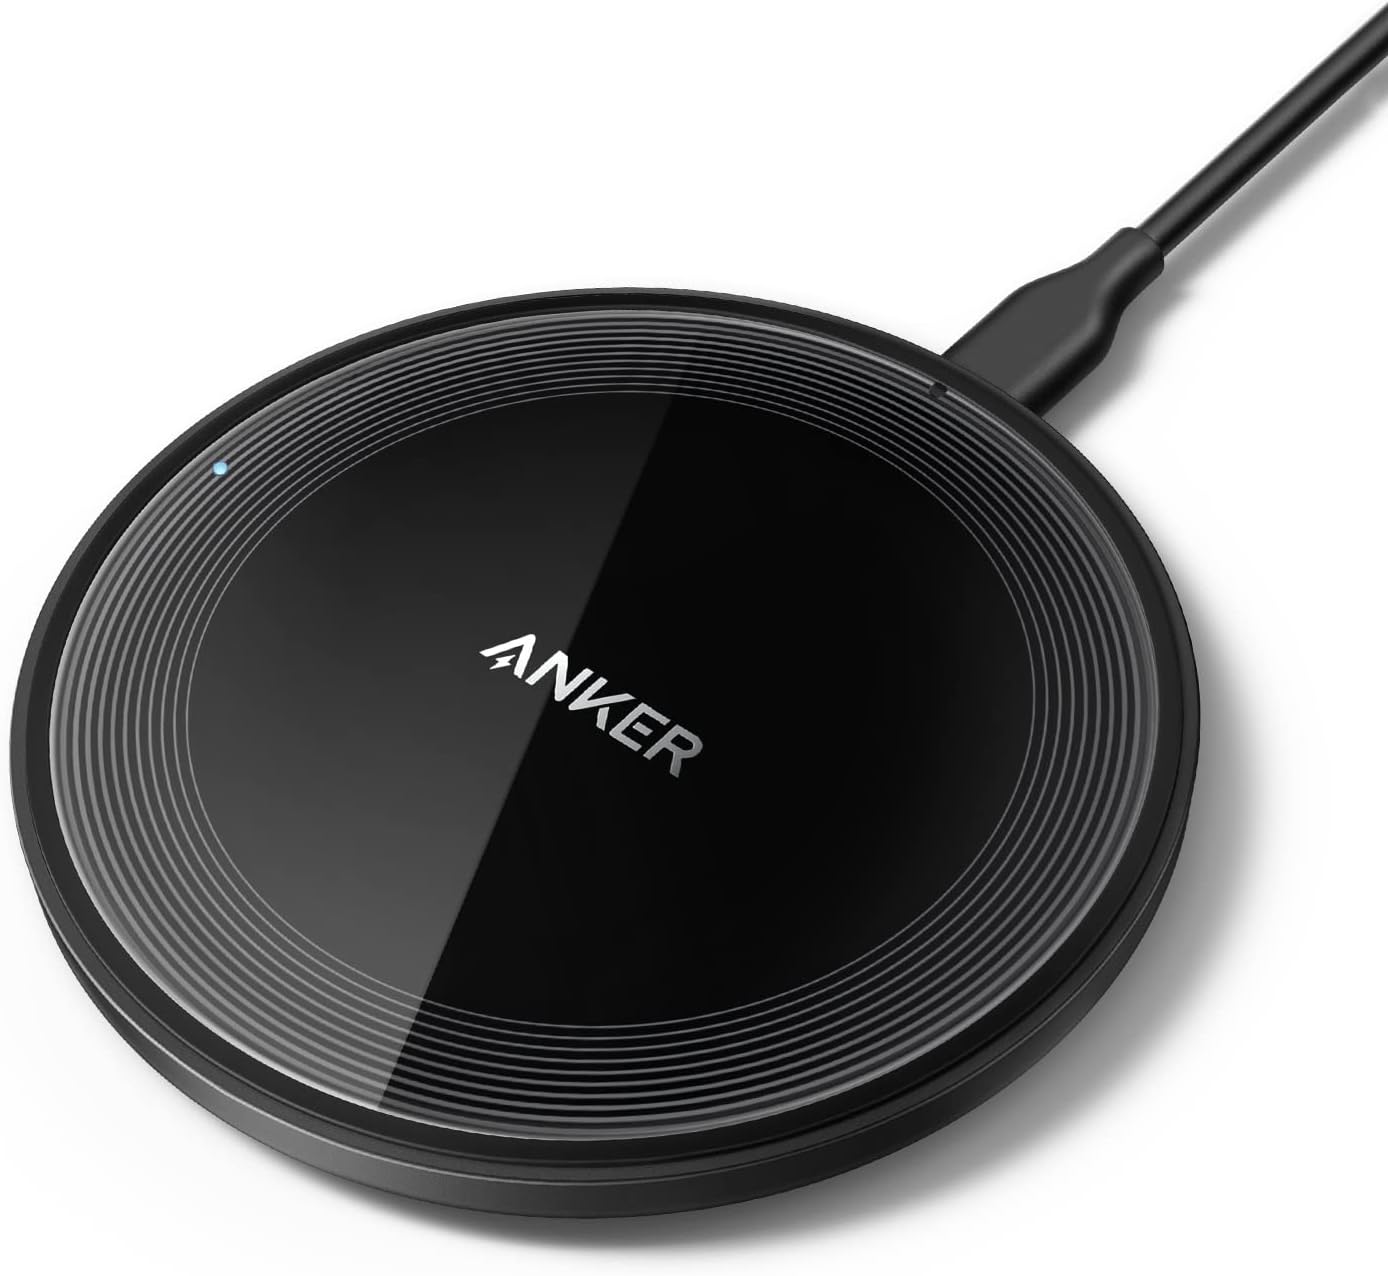 Anker 315 Wireless Charger (Pad), 10W Max Fast Charging martall.pk